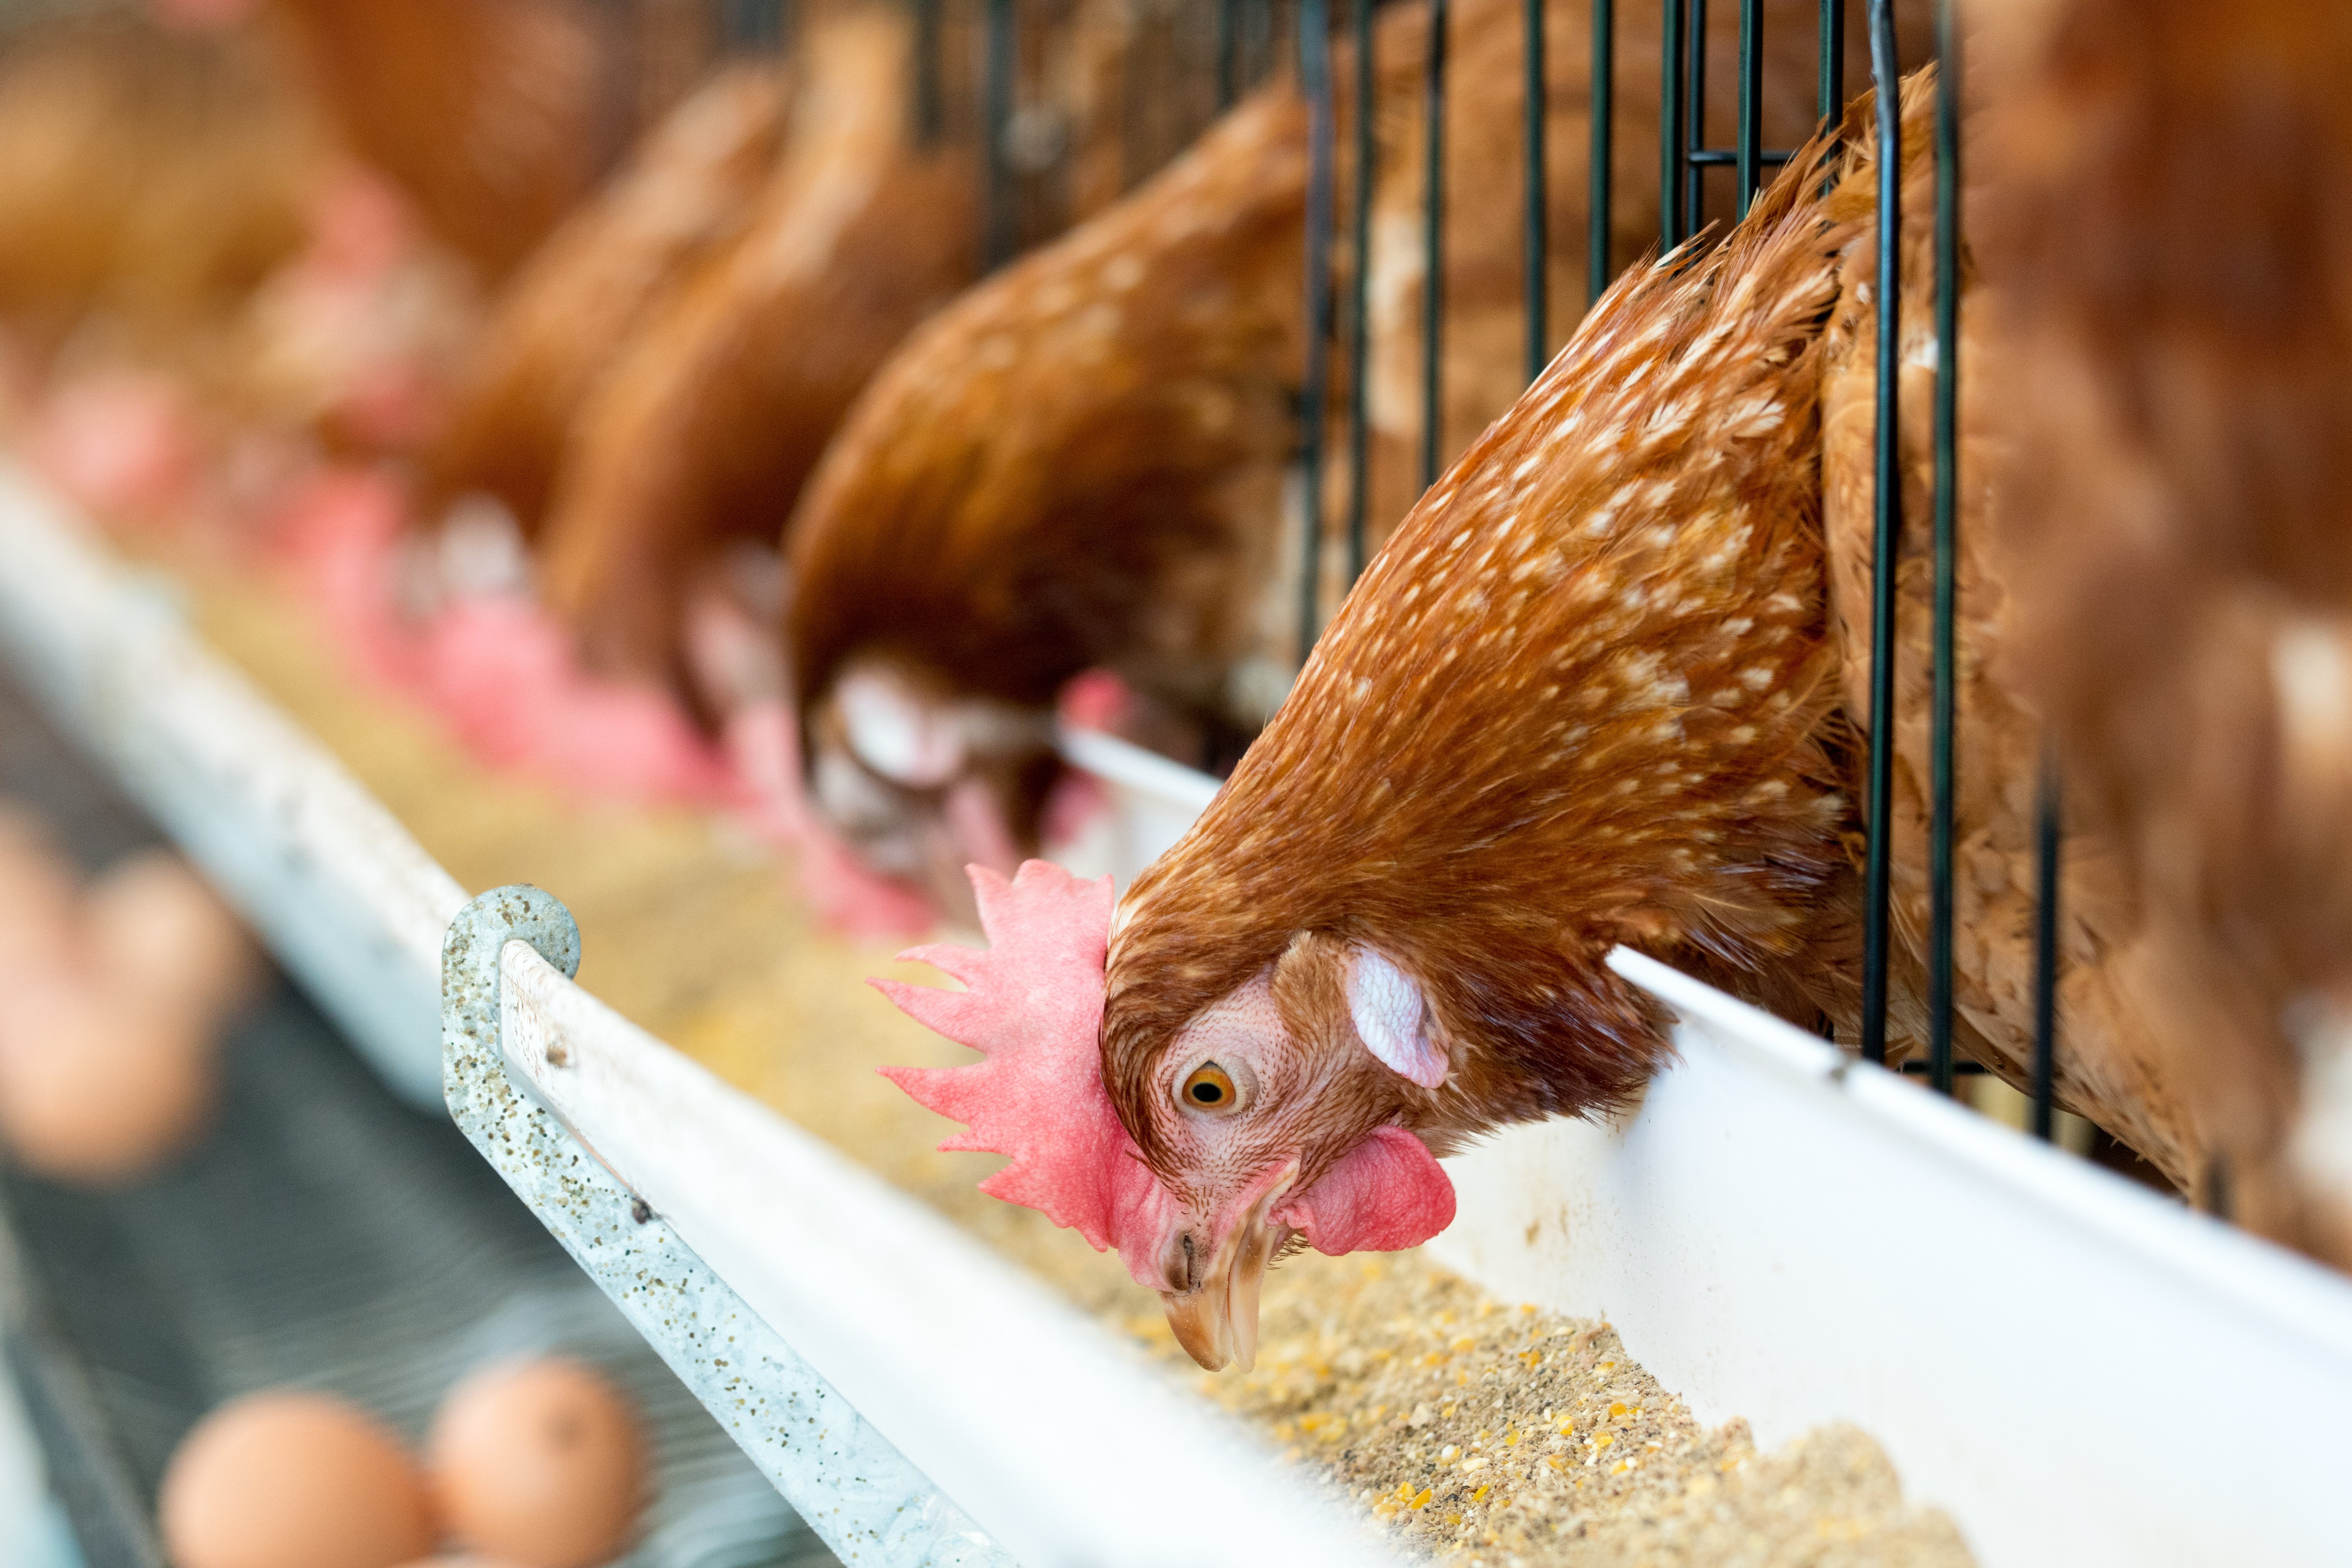 How to optimize profitability for a ‘healthy’ animal protein business